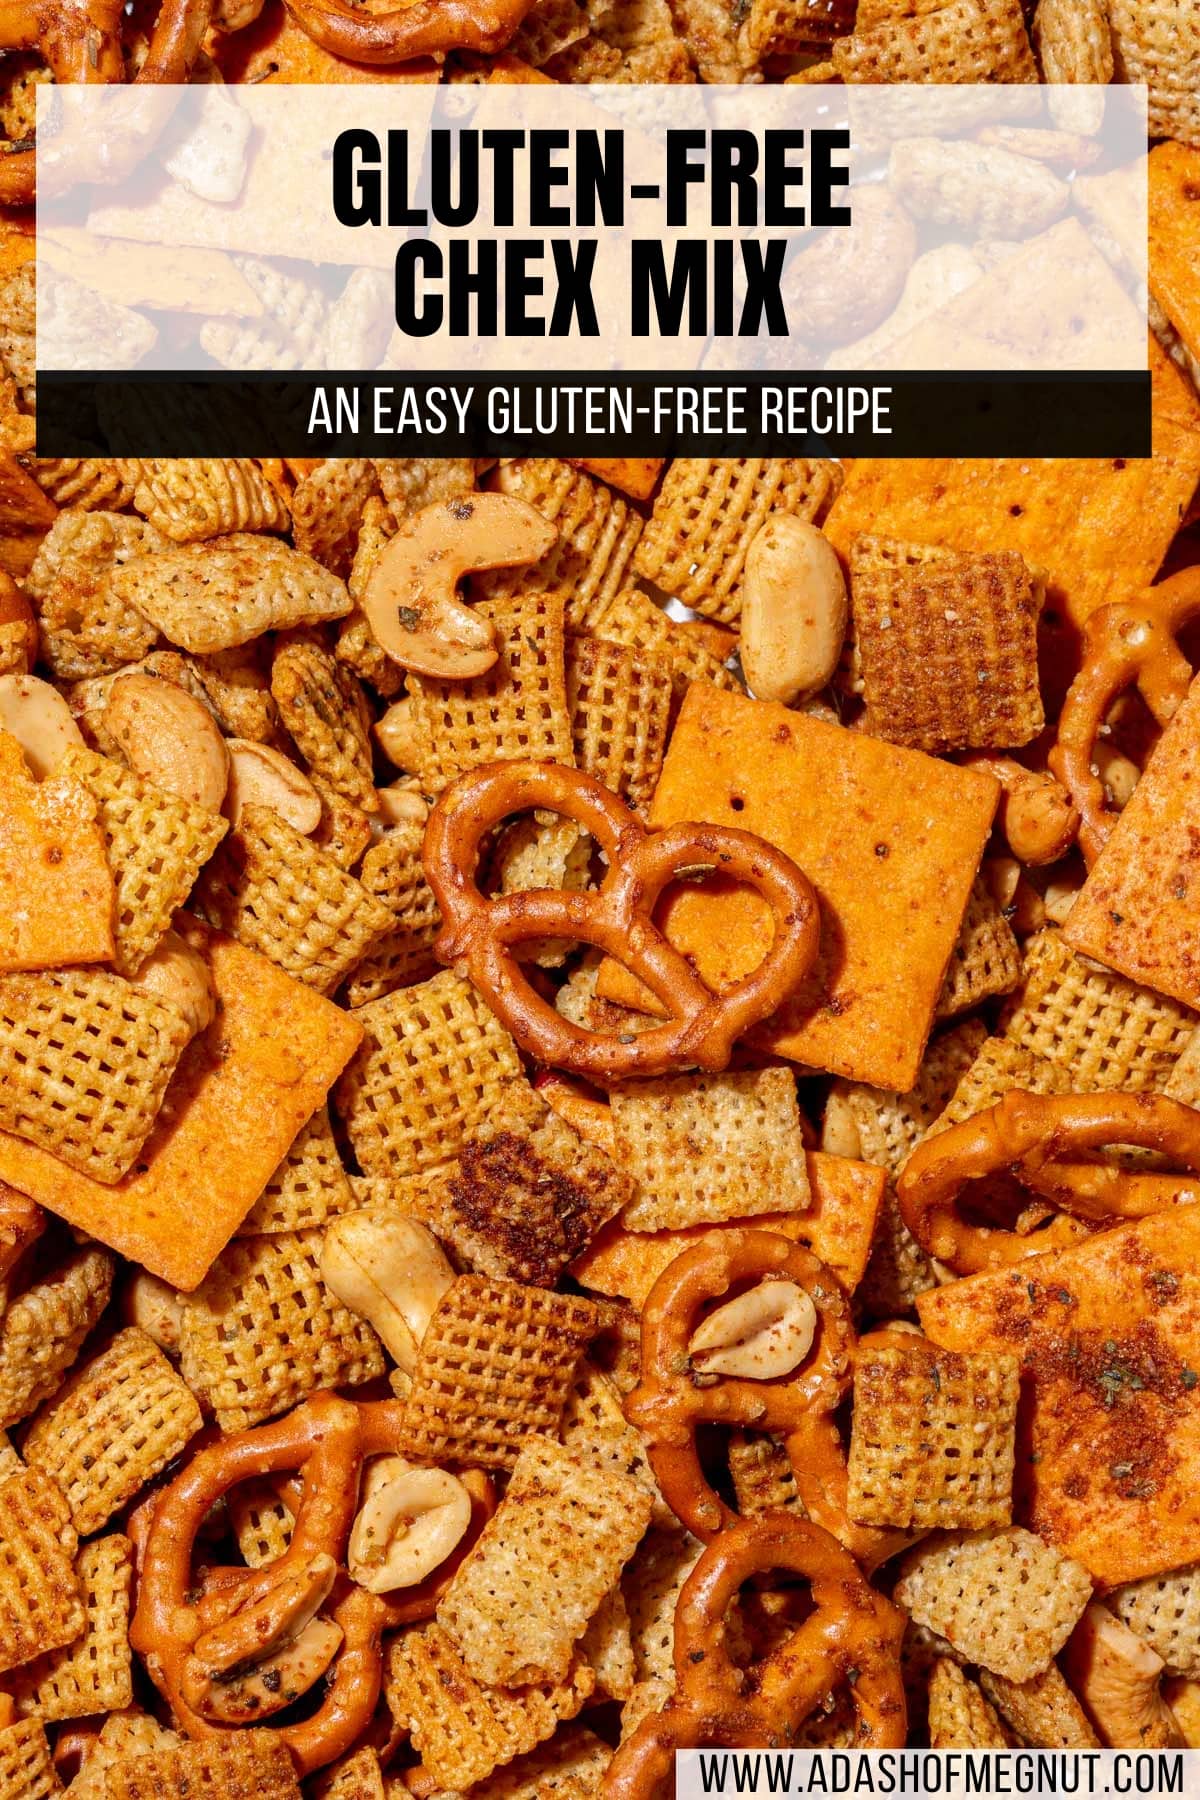 An overhead view of gluten-free chex mix with gluten-free pretzels, cheese cracks, corn chex, rice chex, cashews, and peanuts in it.